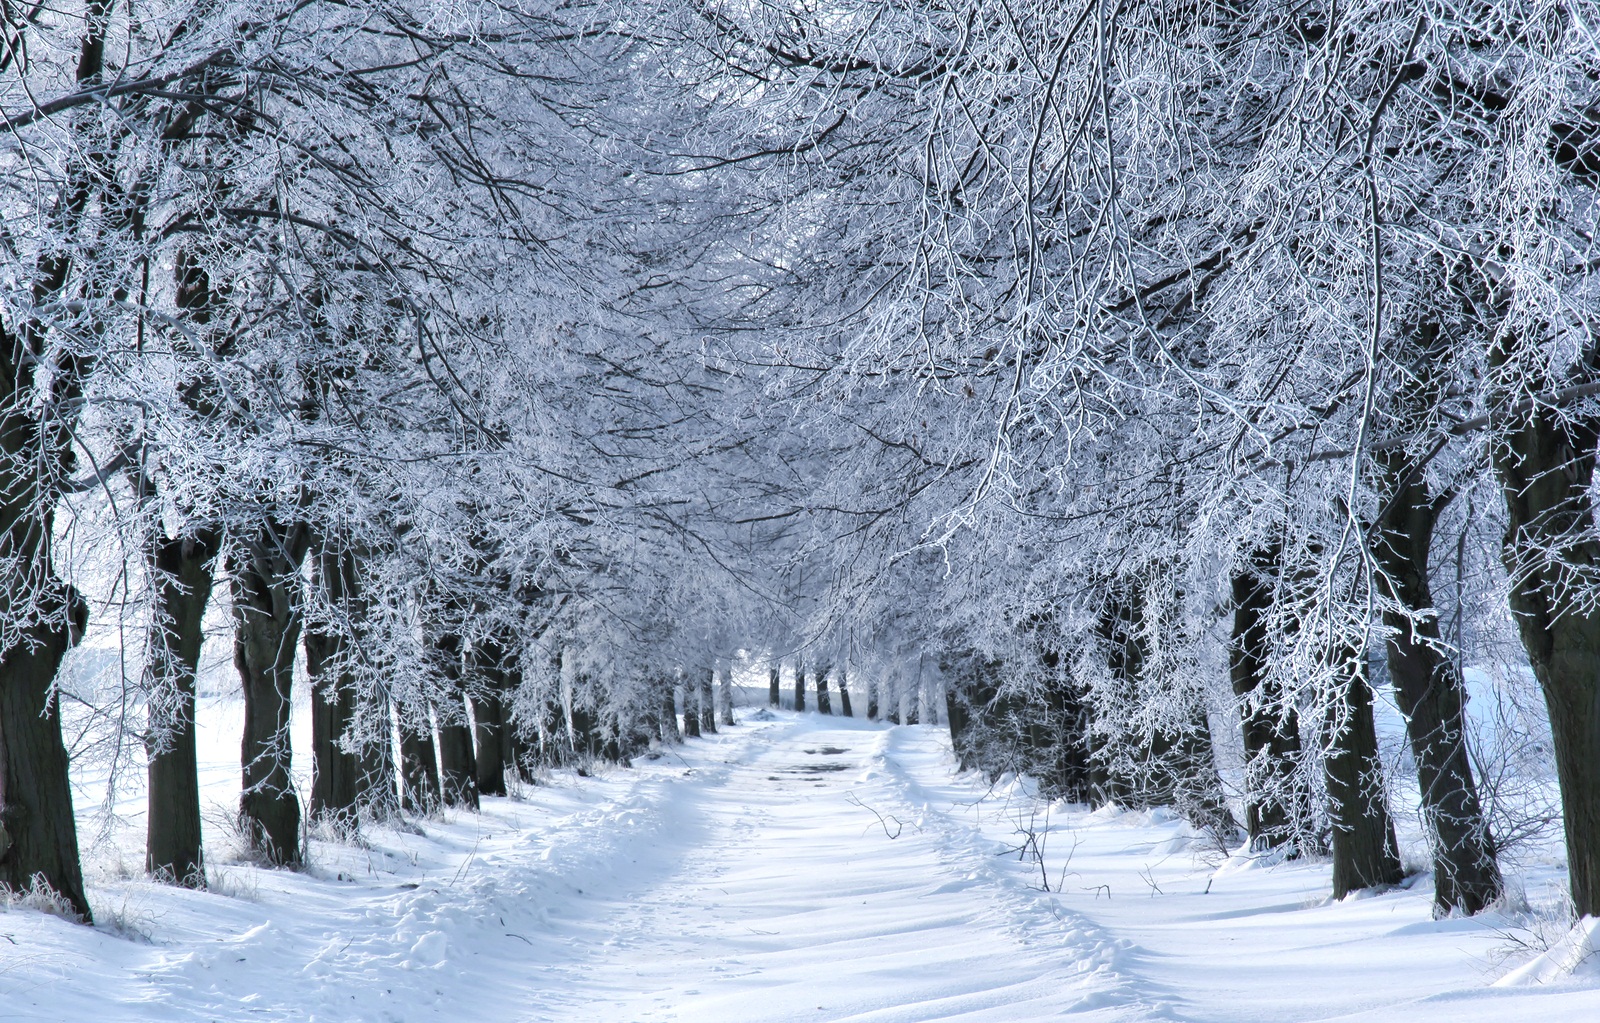 Winter Wonderland, The Best Place To Celebrate Christmas Holidays in